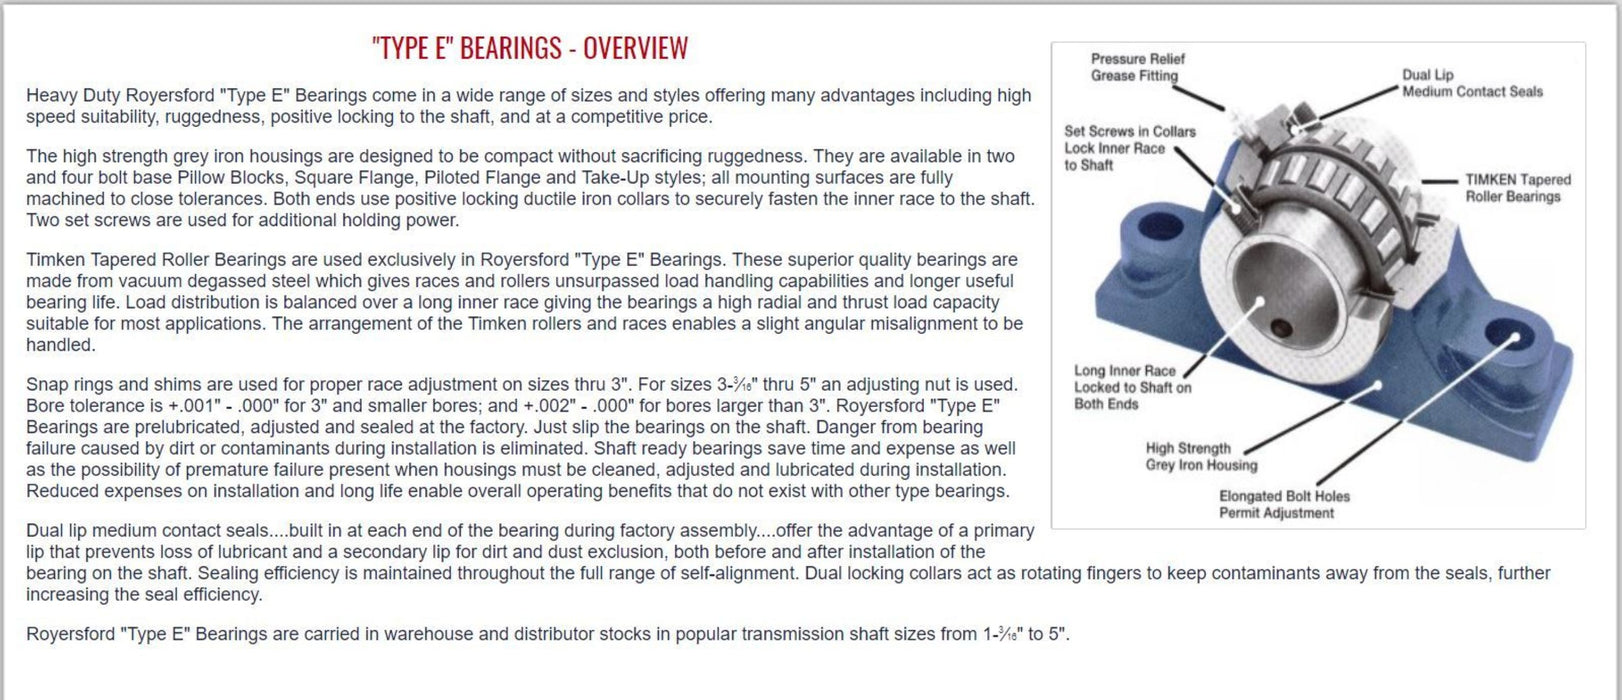 20-05-0208, Royersford Type E 4 Bolt Square Flange Bearing, 2-1/2" with Timken Tapered Roller Bearings